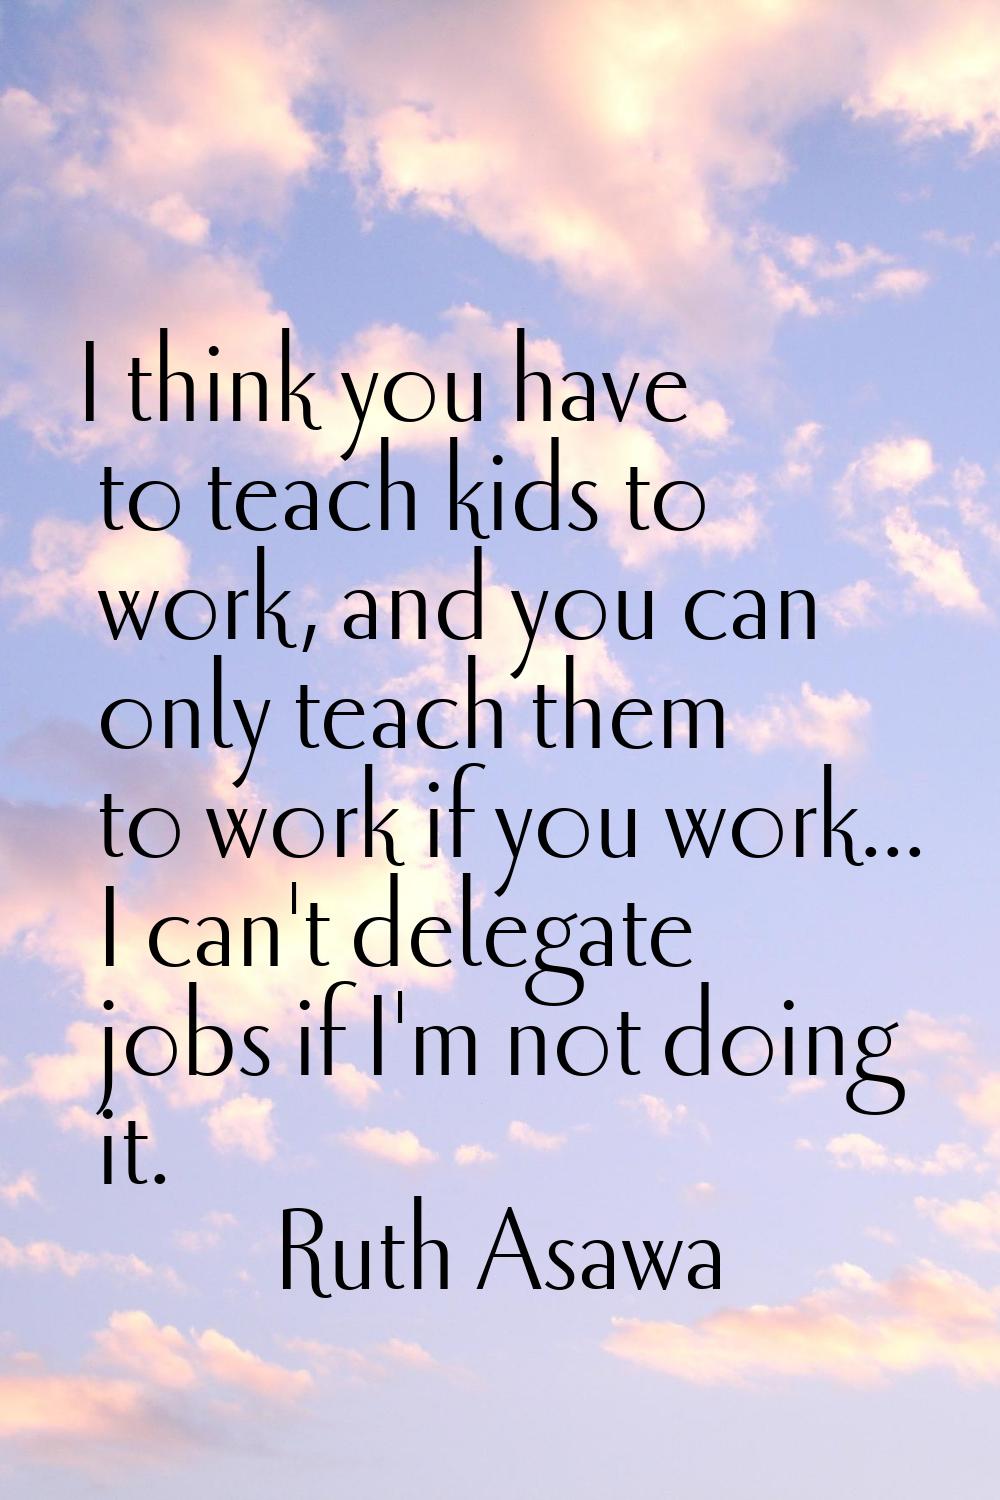 I think you have to teach kids to work, and you can only teach them to work if you work... I can't 